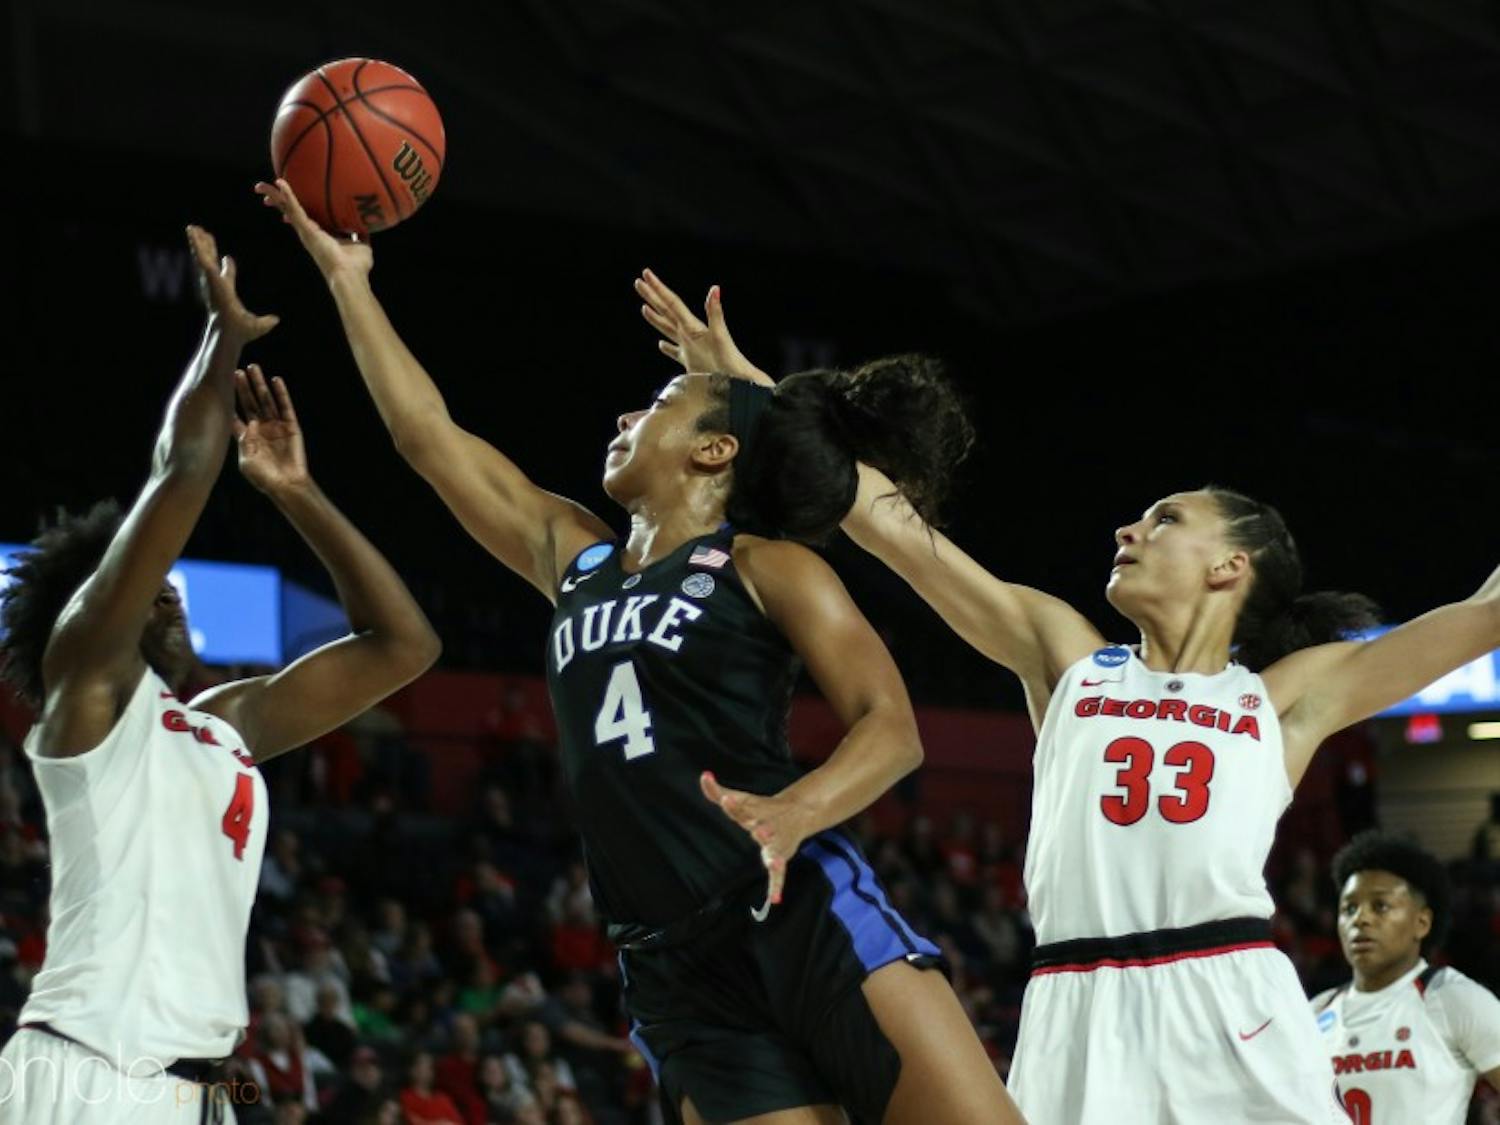 Lexie Brown anchored Duke's defense with several steals to keep the Bulldogs at bay.